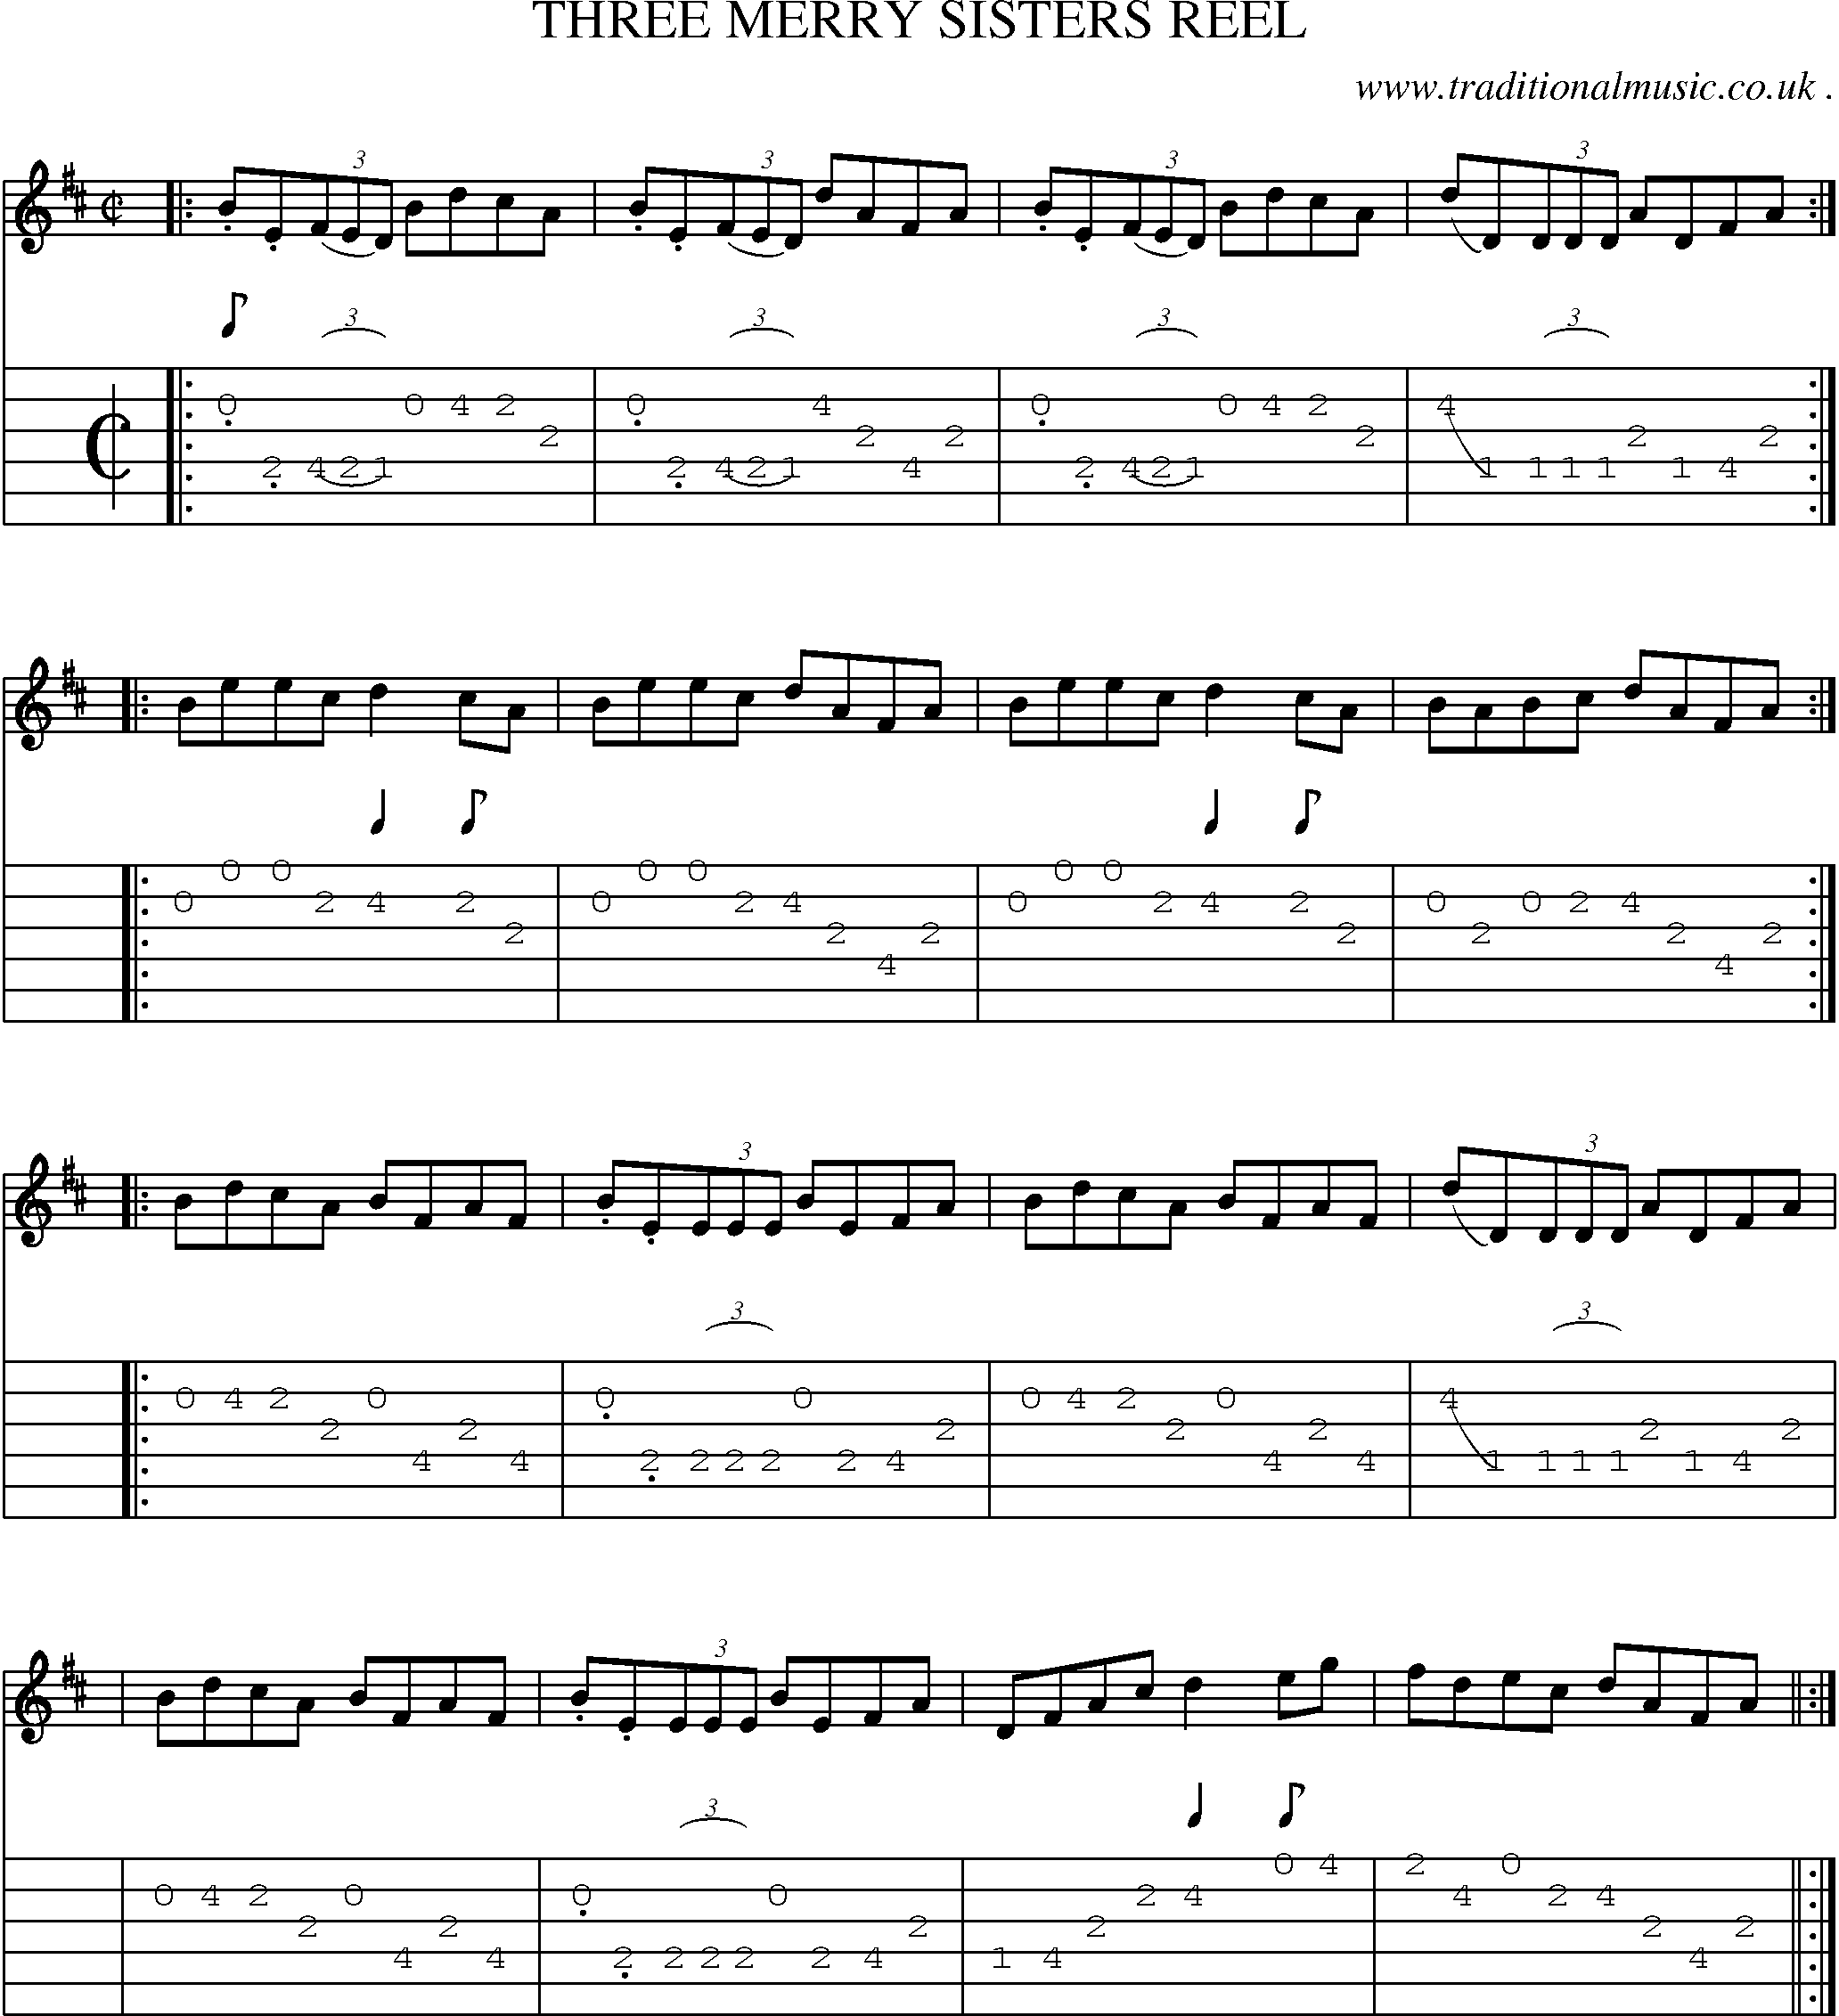 Sheet-Music and Guitar Tabs for Three Merry Sisters Reel